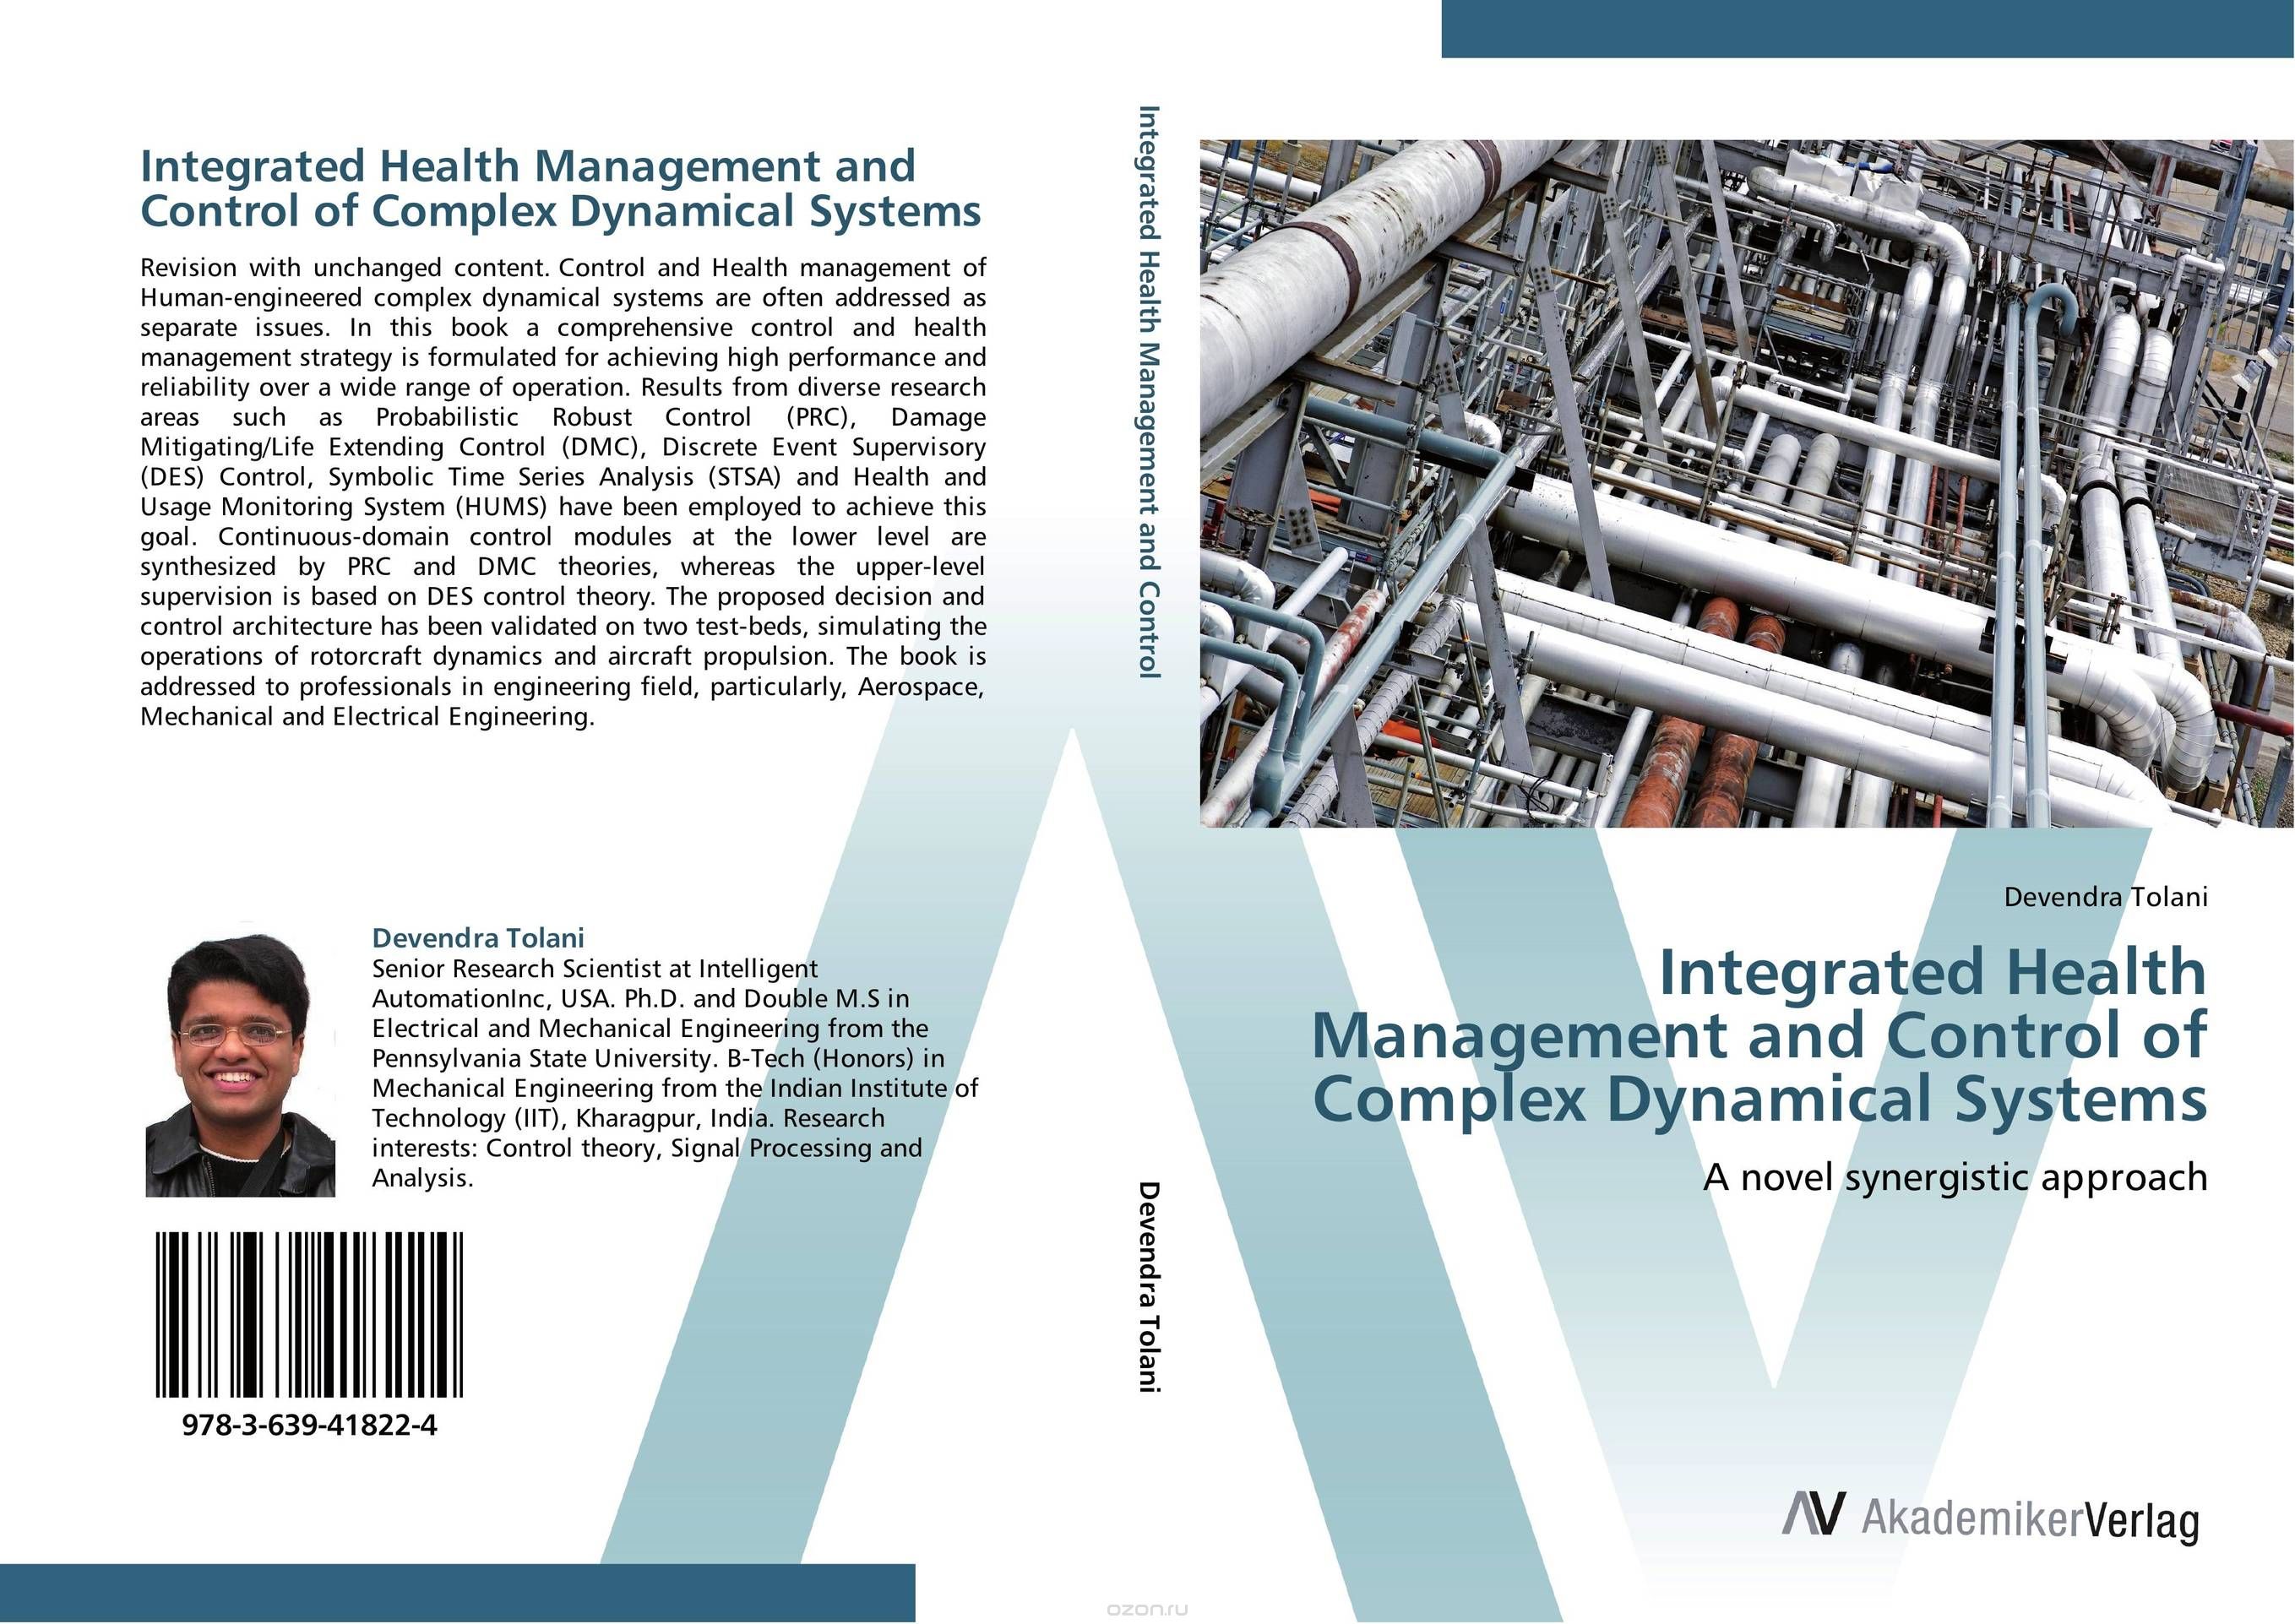 Скачать книгу "Integrated Health Management and Control of Complex Dynamical Systems"